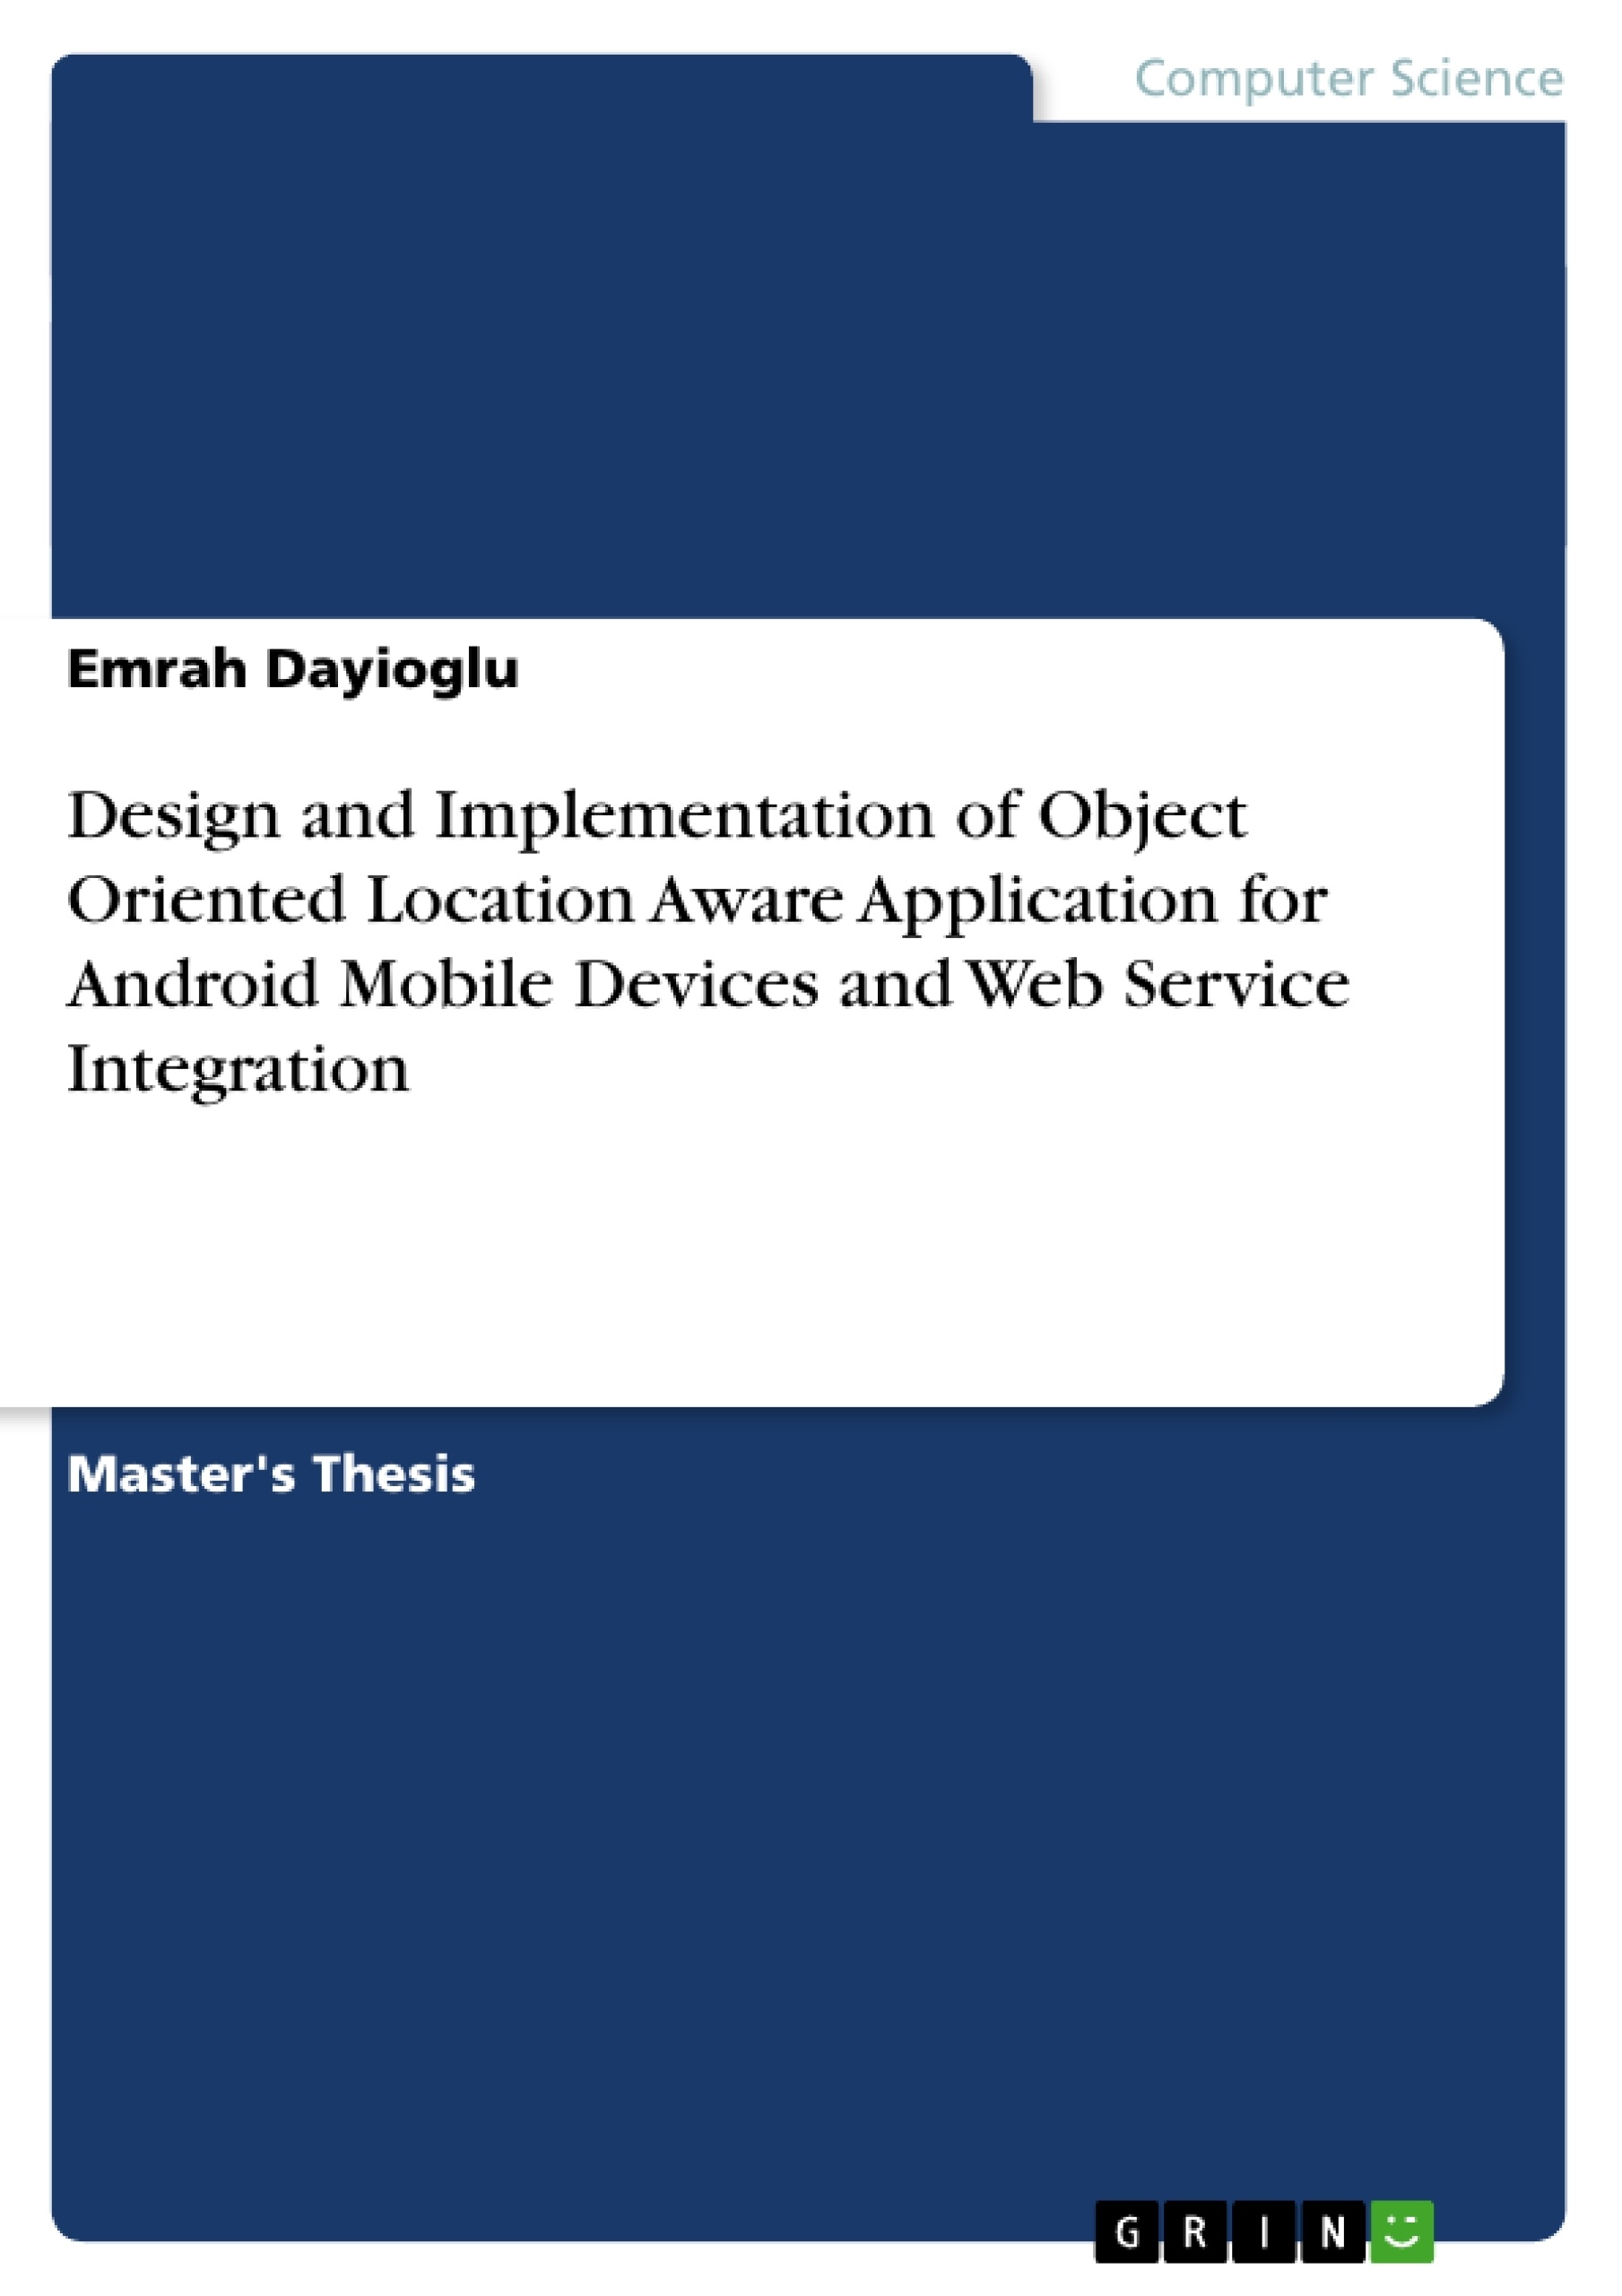 Title: Design and Implementation of Object Oriented Location Aware Application for Android Mobile Devices and Web Service Integration